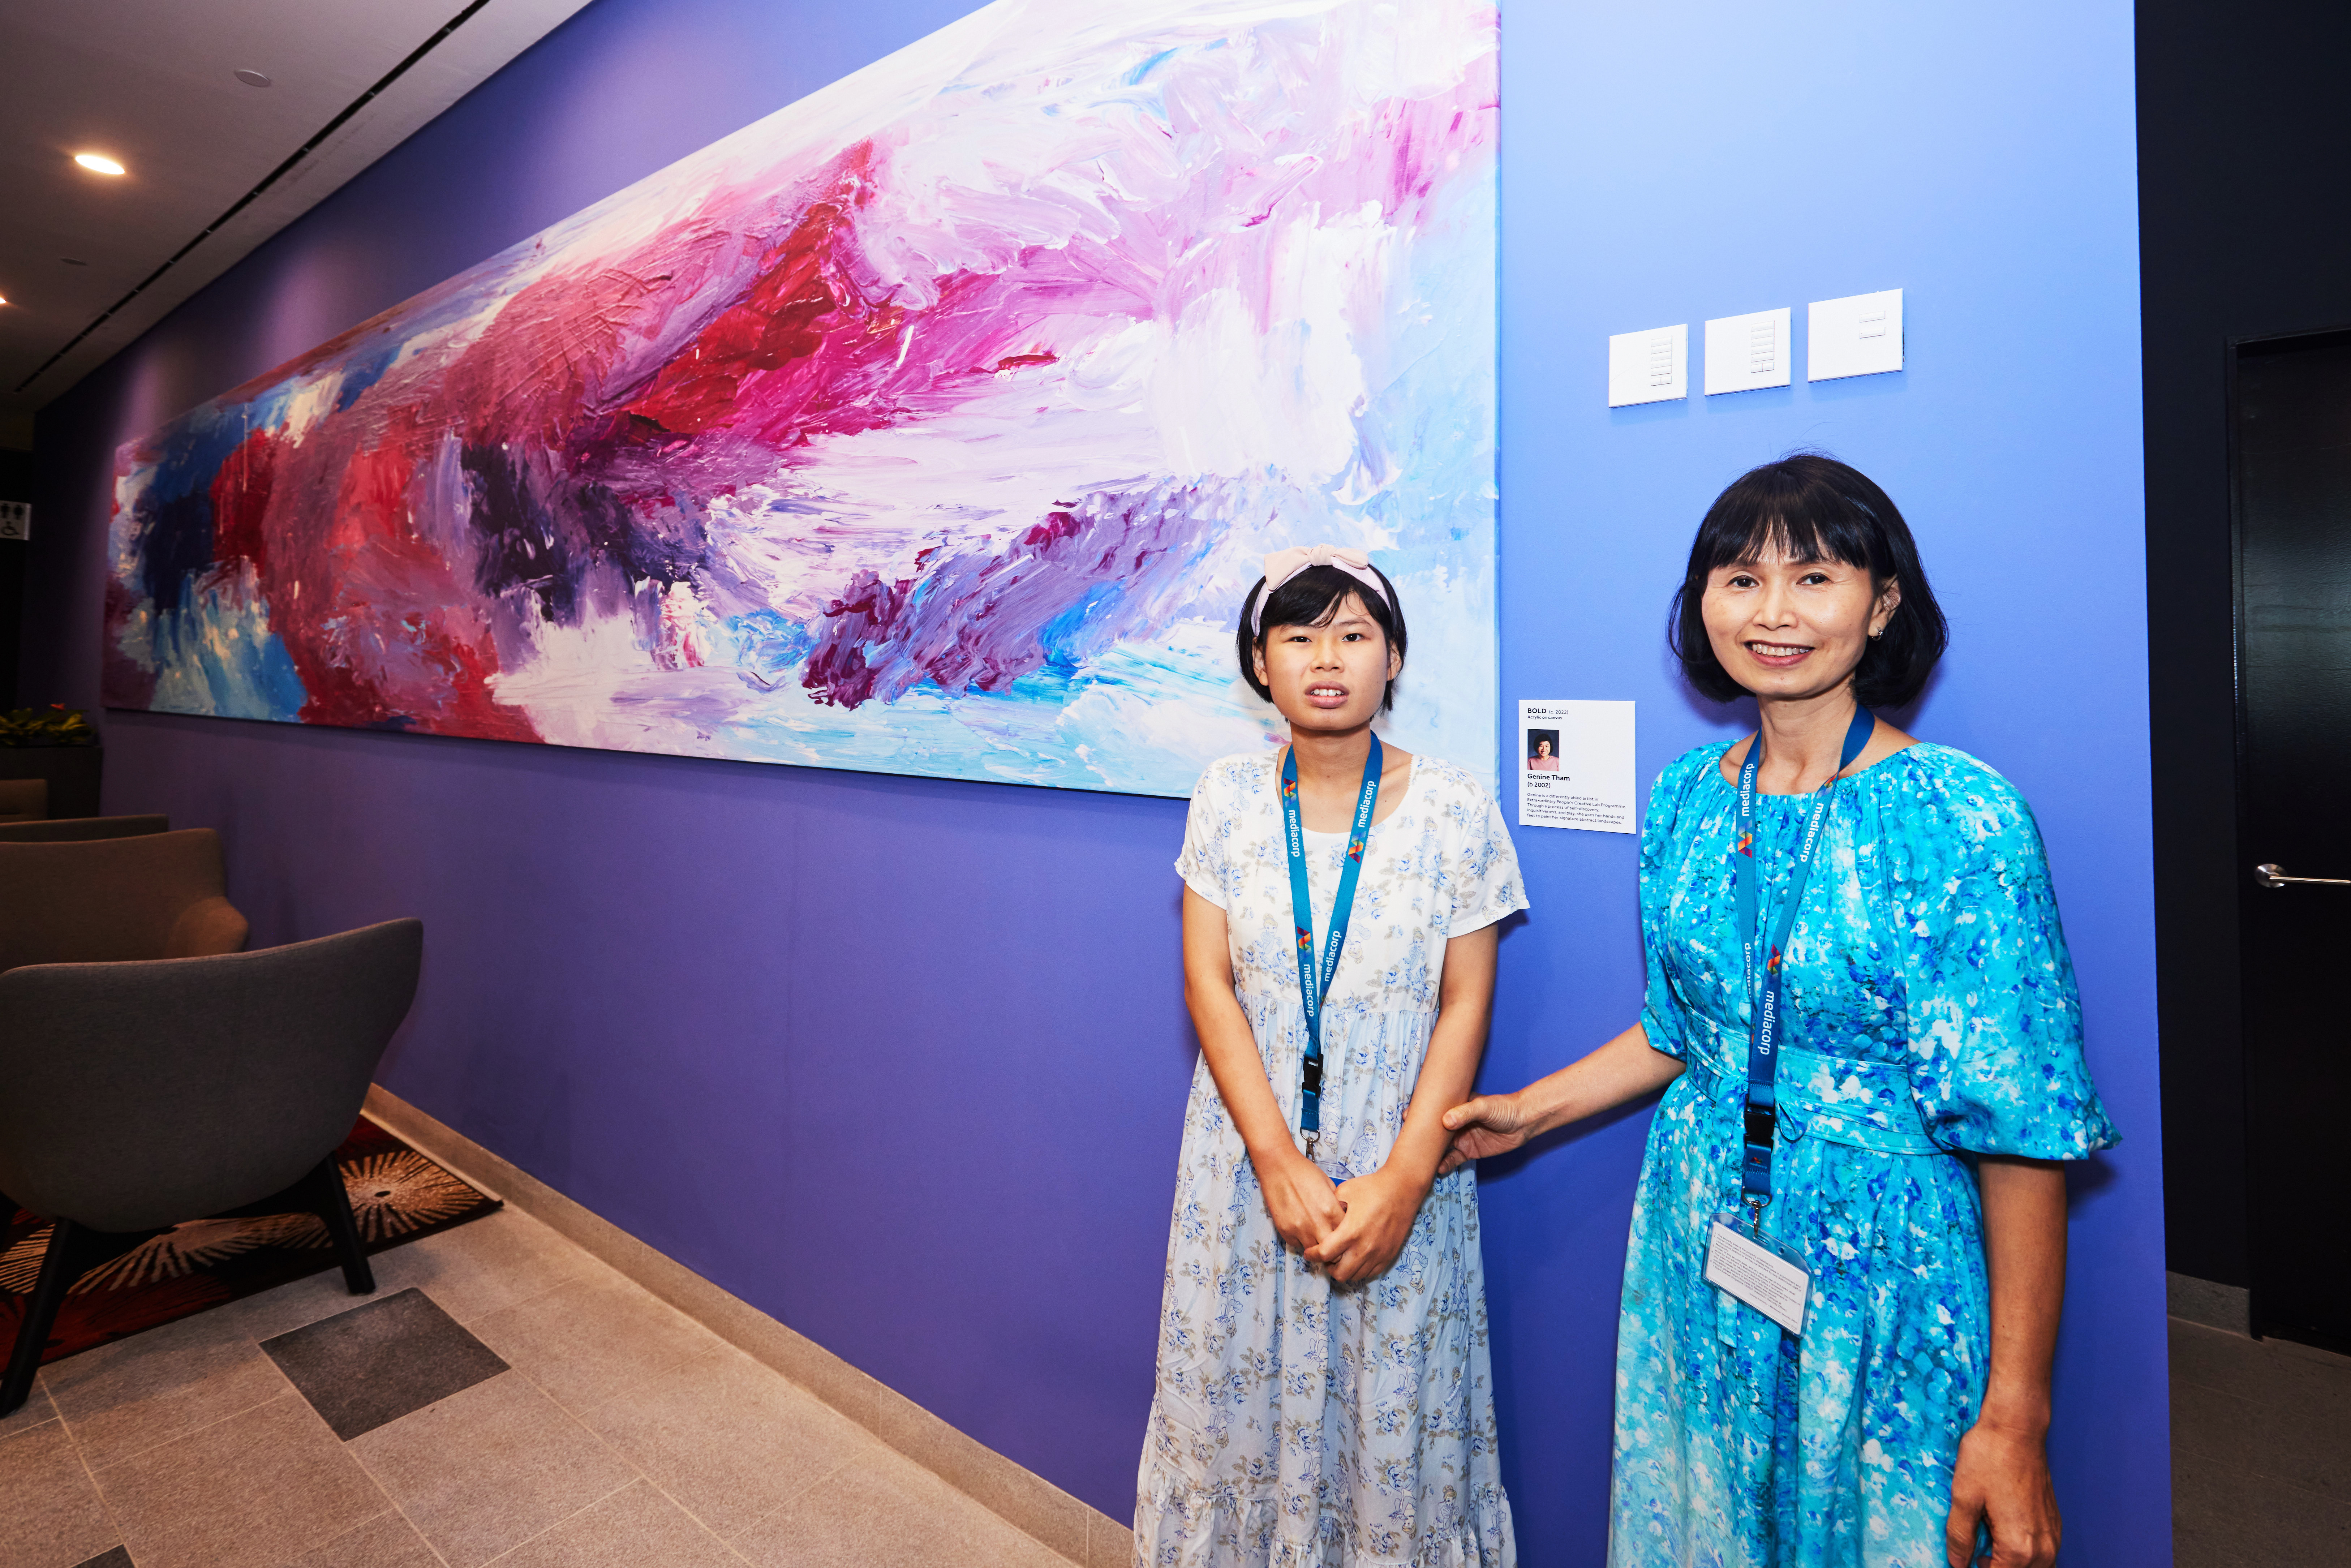 Genine Tham - beneficiary from ExtraOrdinary People, stands with her mother by her remarkable painting titled Bold